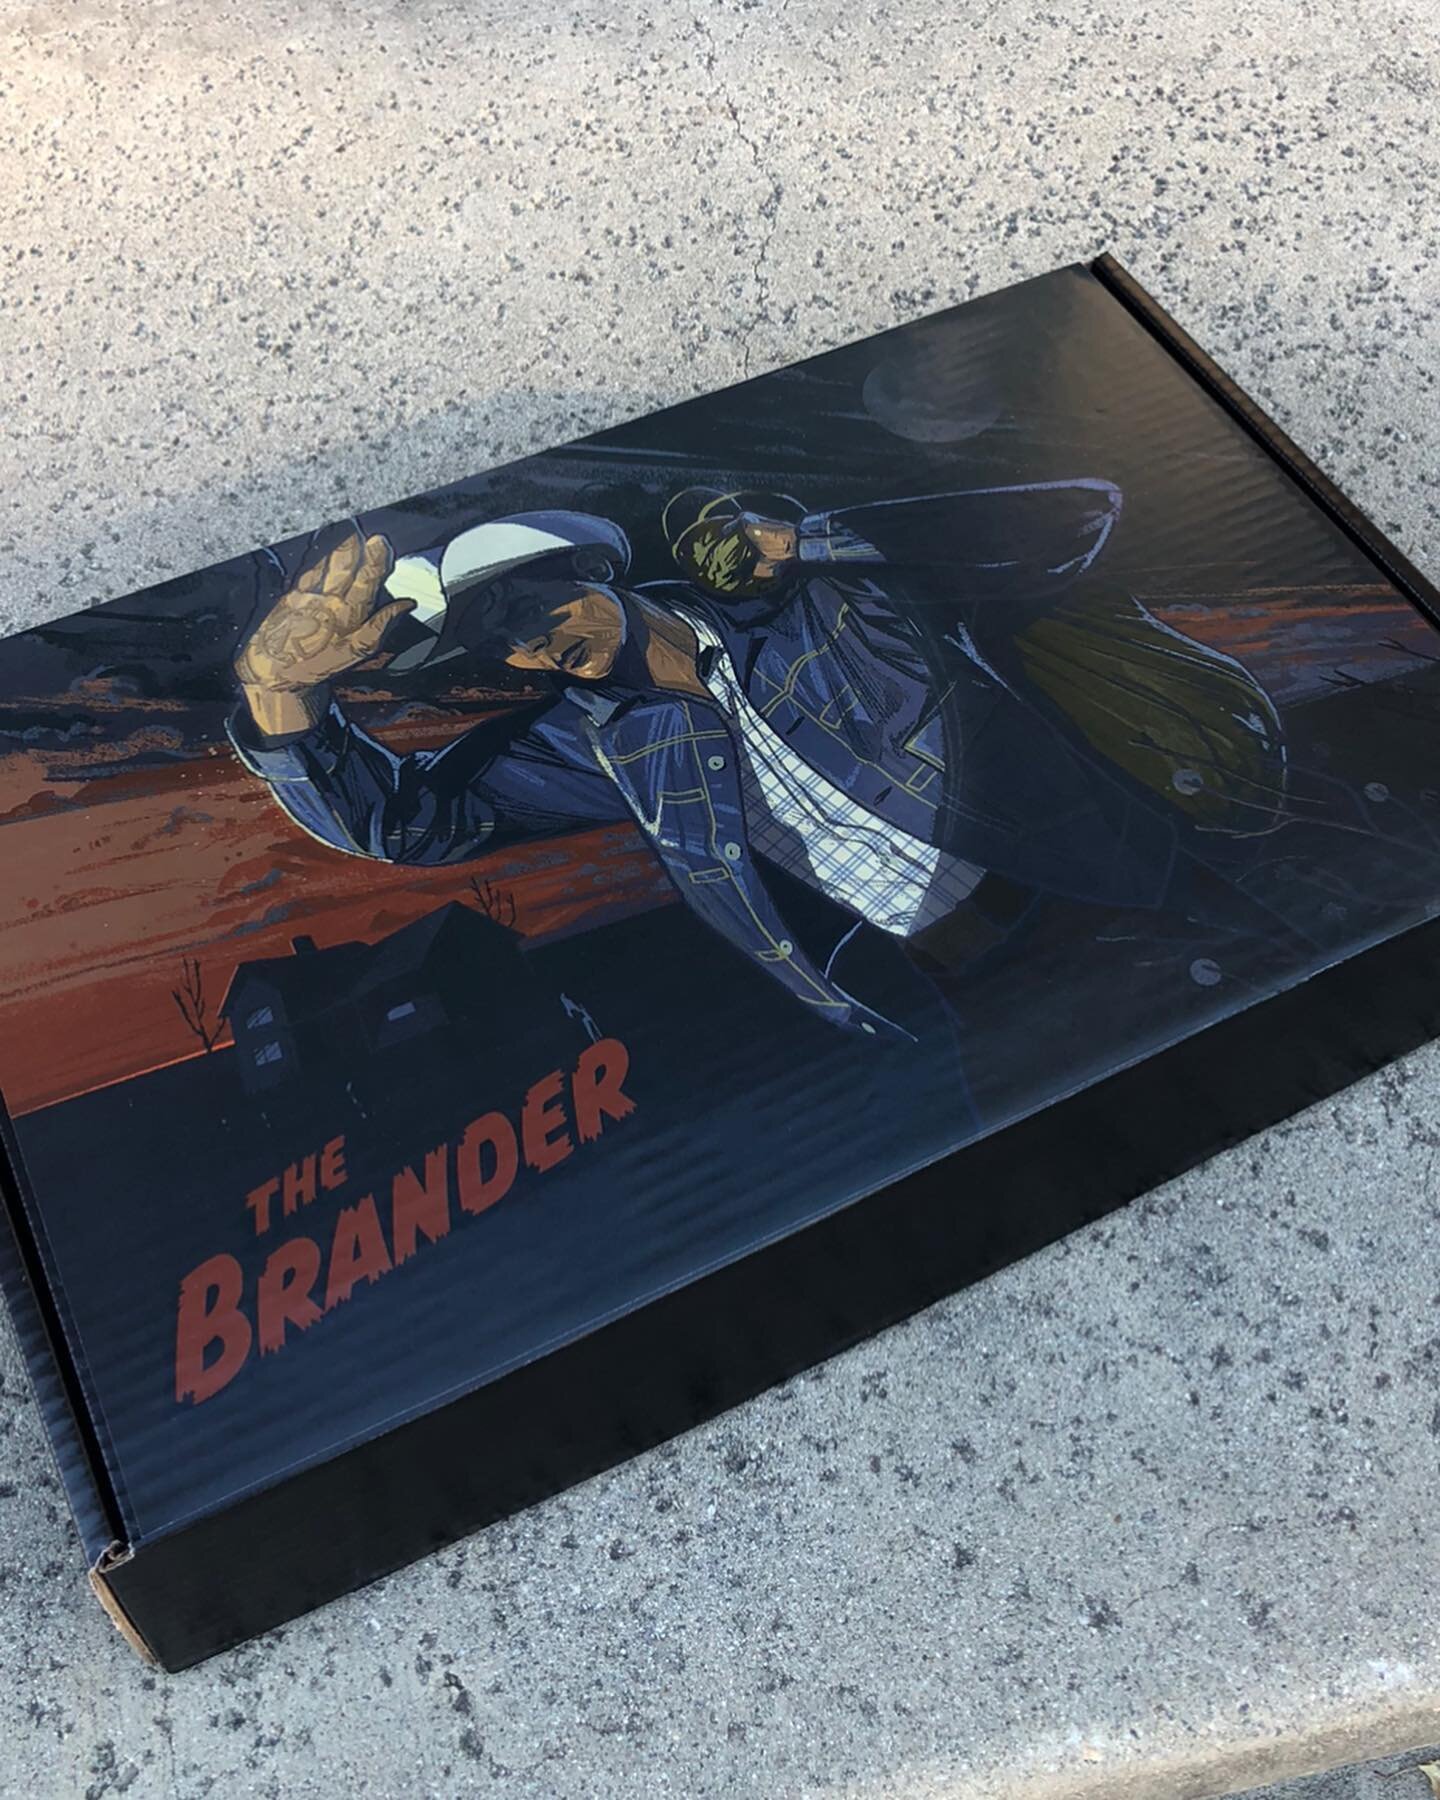 Pleased to announce that we will start shipping our first batch of Brander pre orders Monday and Tuesday. Check out the accoutrements that adorn this iconic Runabout X Proximity Mfg. release. Get yours now and we will try to have them shipped out in 